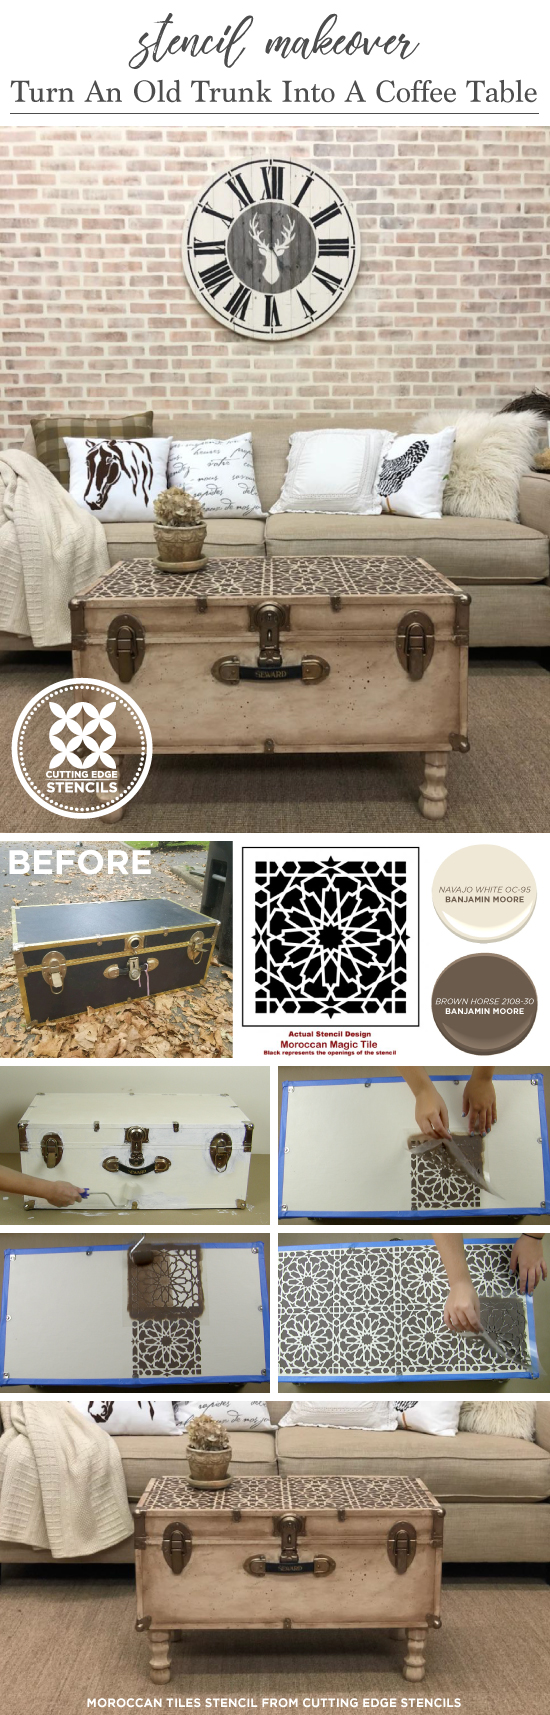 Stencil Makeover Turn An Old Trunk Into A Coffee Table Stencil